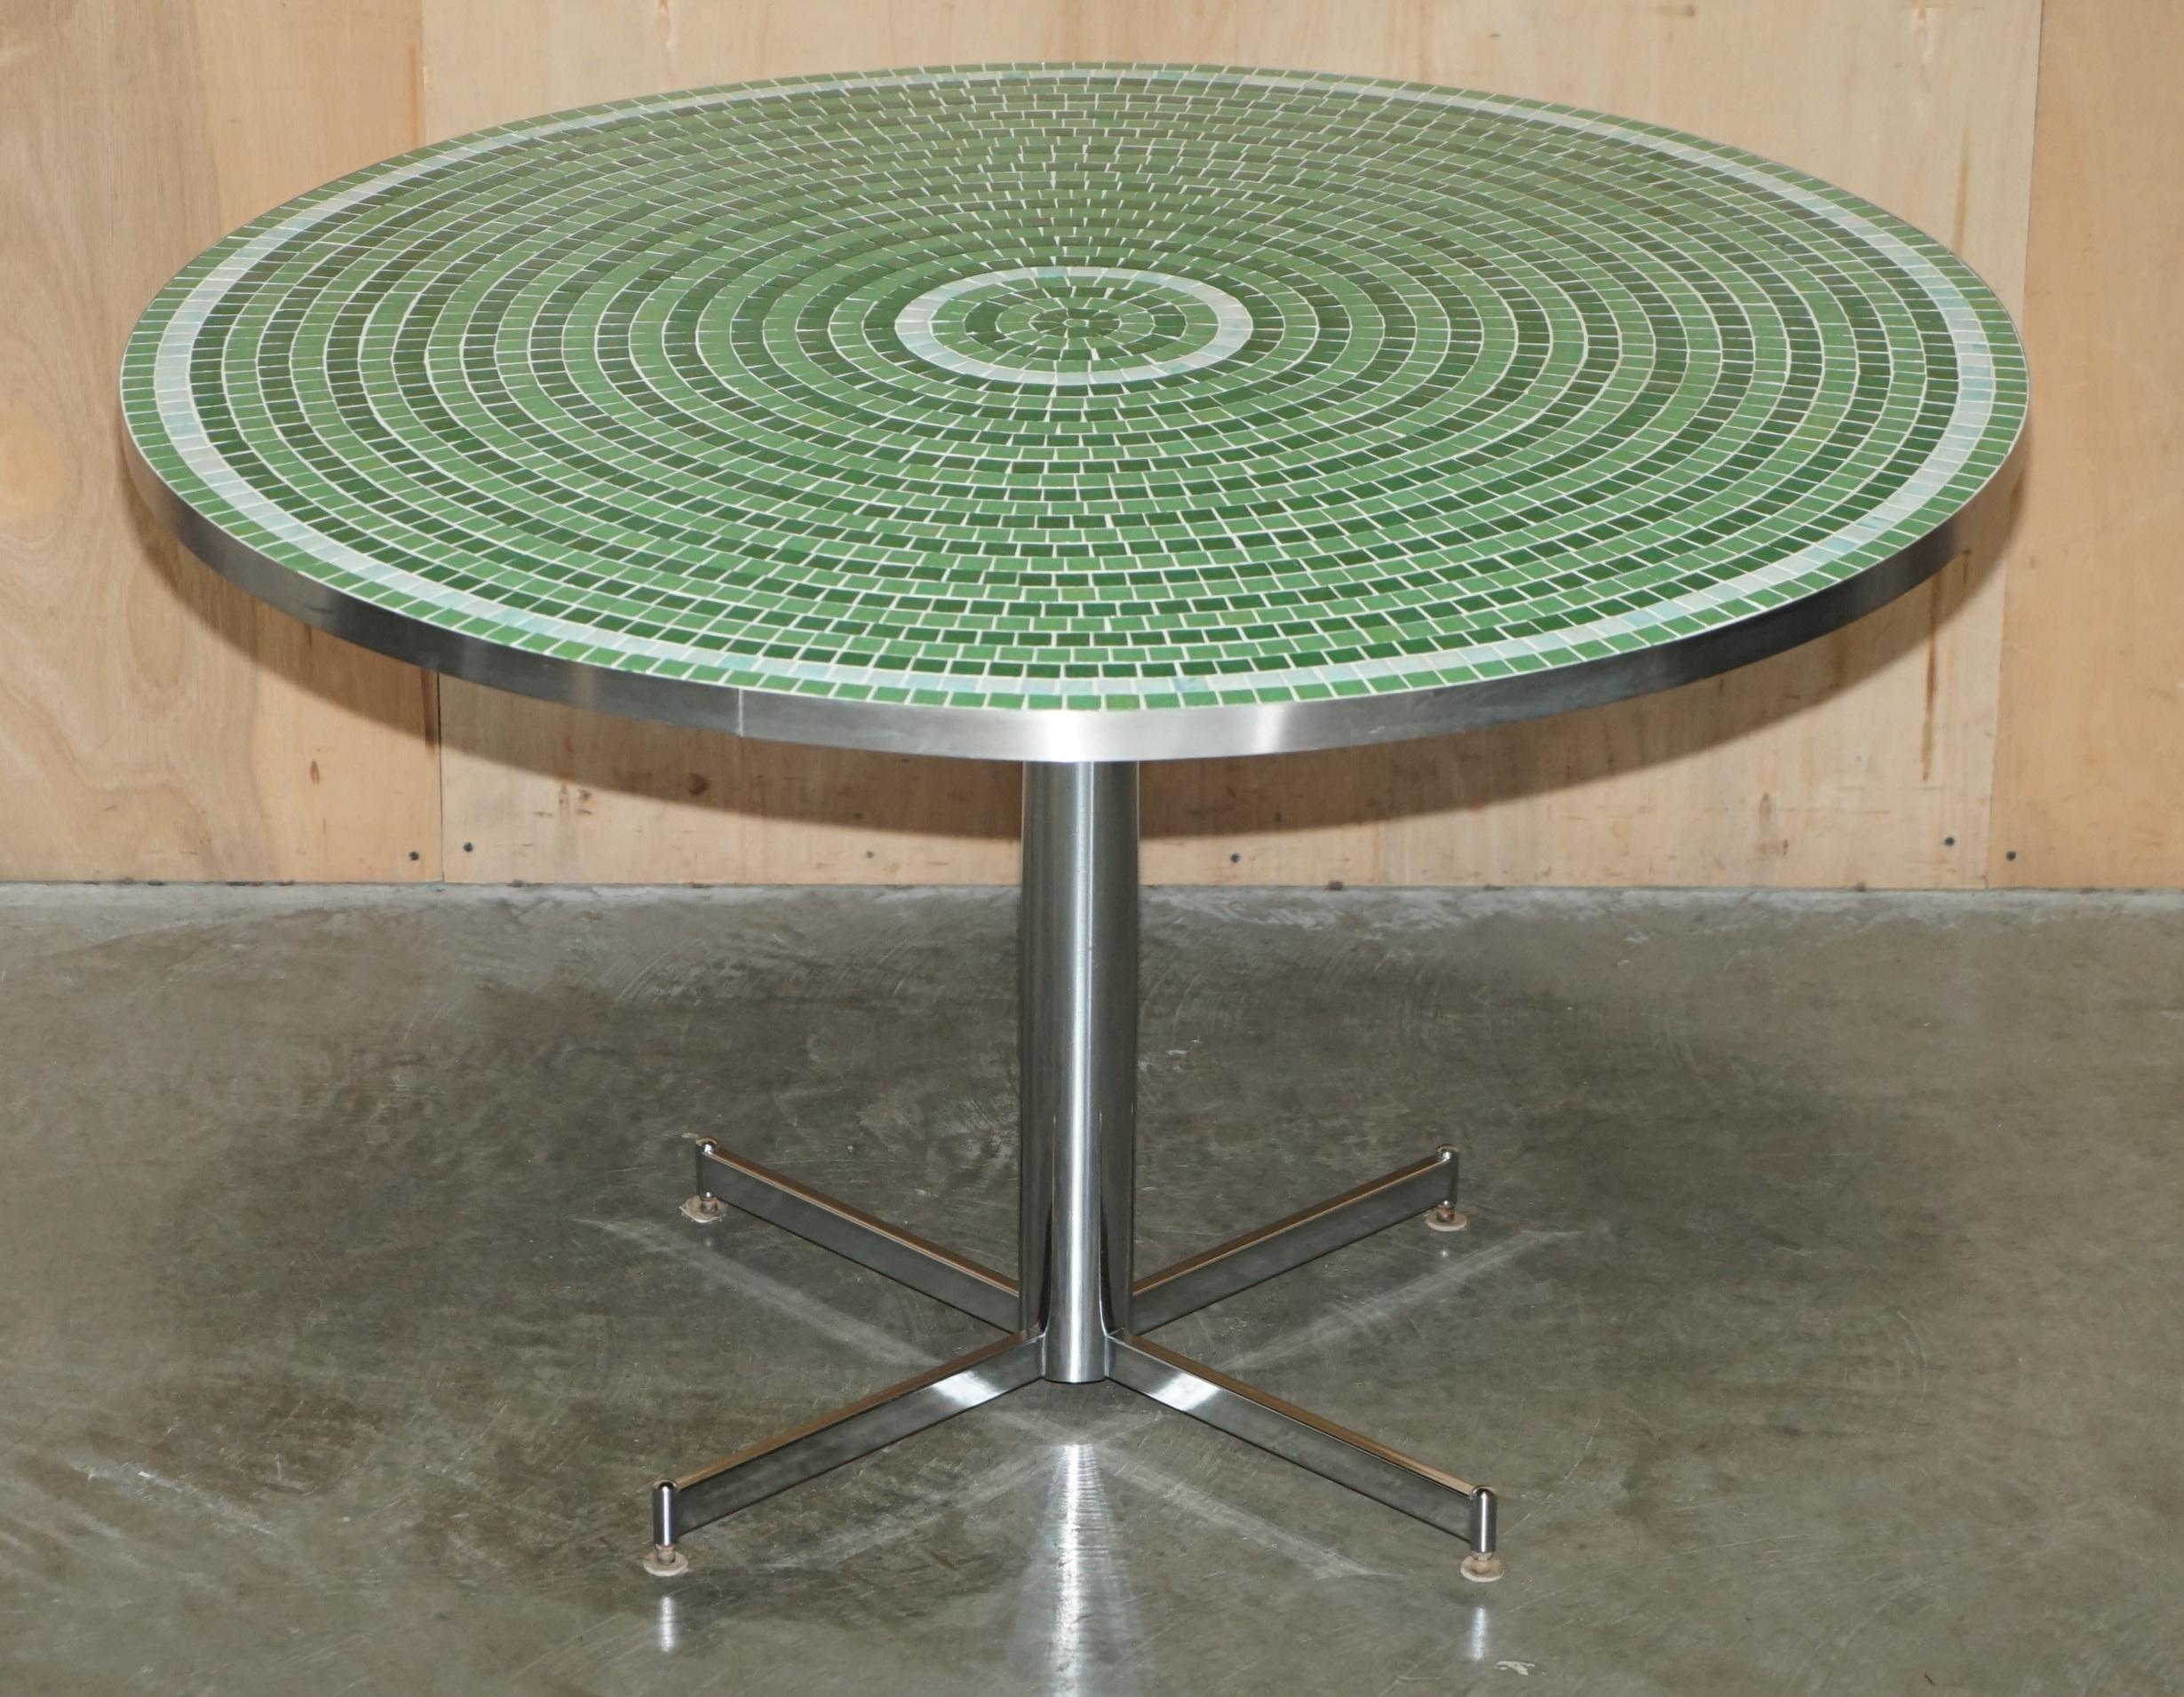 Royal House Antiques

Royal House Antiques is delighted to offer for sale this sublime, super decorative vibrant Green Mosaic tiled Chrome framed dining table

Please note the delivery fee listed is just a guide, it covers within the M25 only for